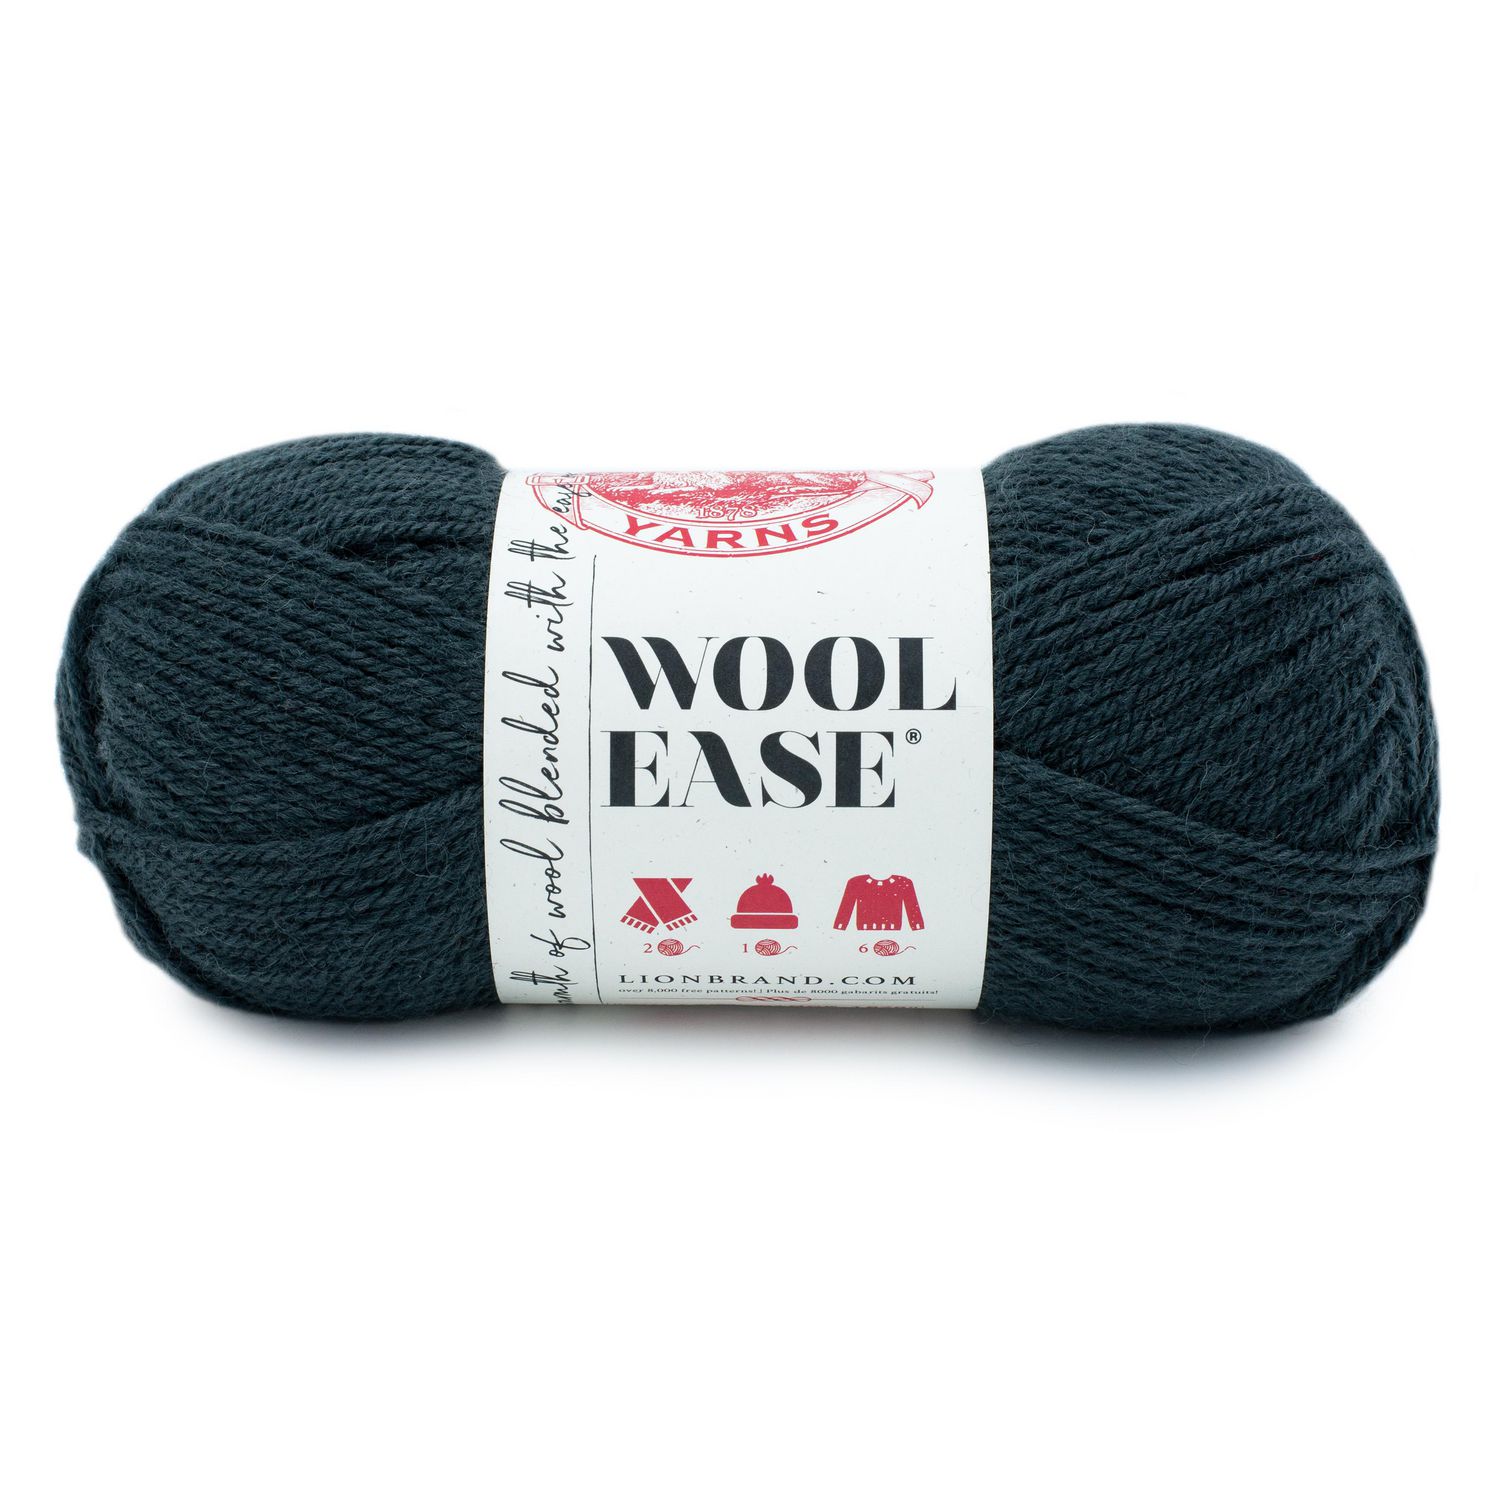 Lion Brand Yarn Wool Ease Thick & Quick Charcoal 640-149 Classic Bulky Yarn,  warmth and softness of wool with easy care 